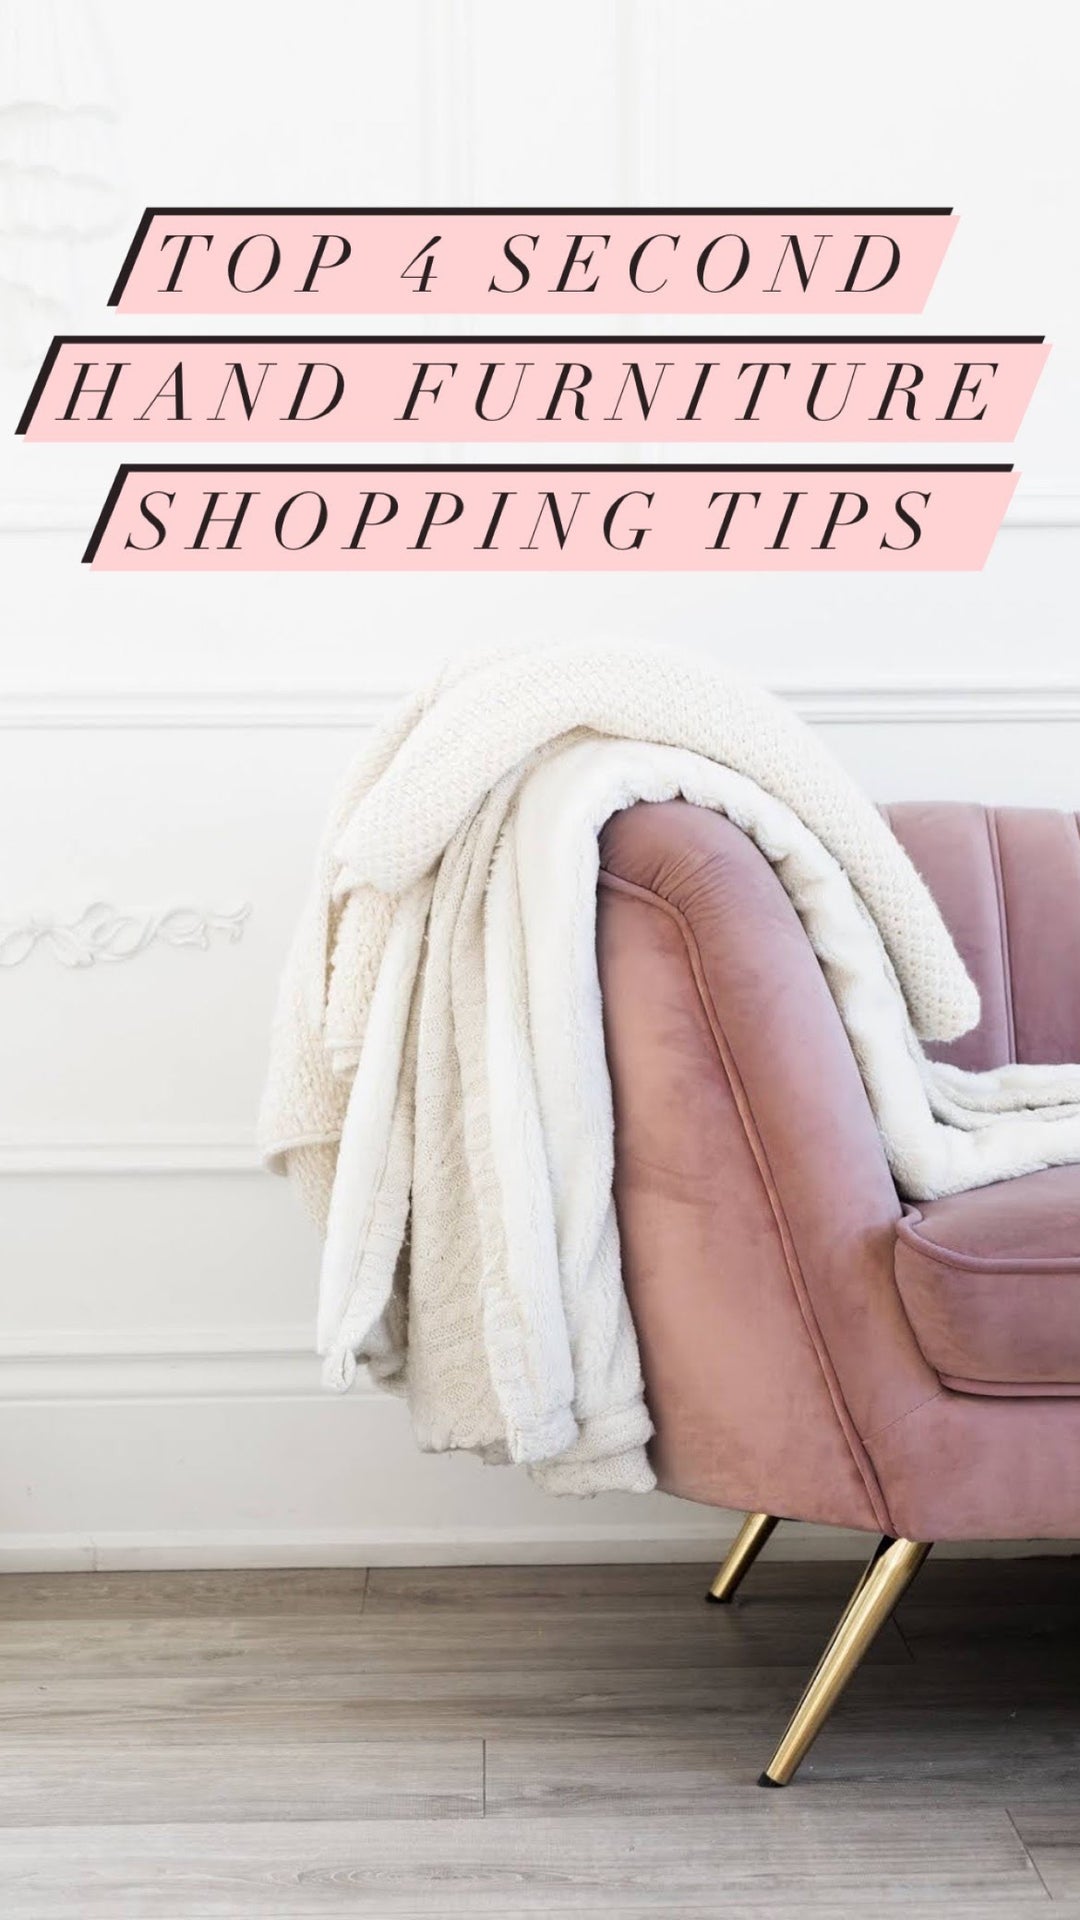 Top 4 Second Hand Furniture Shopping Tips